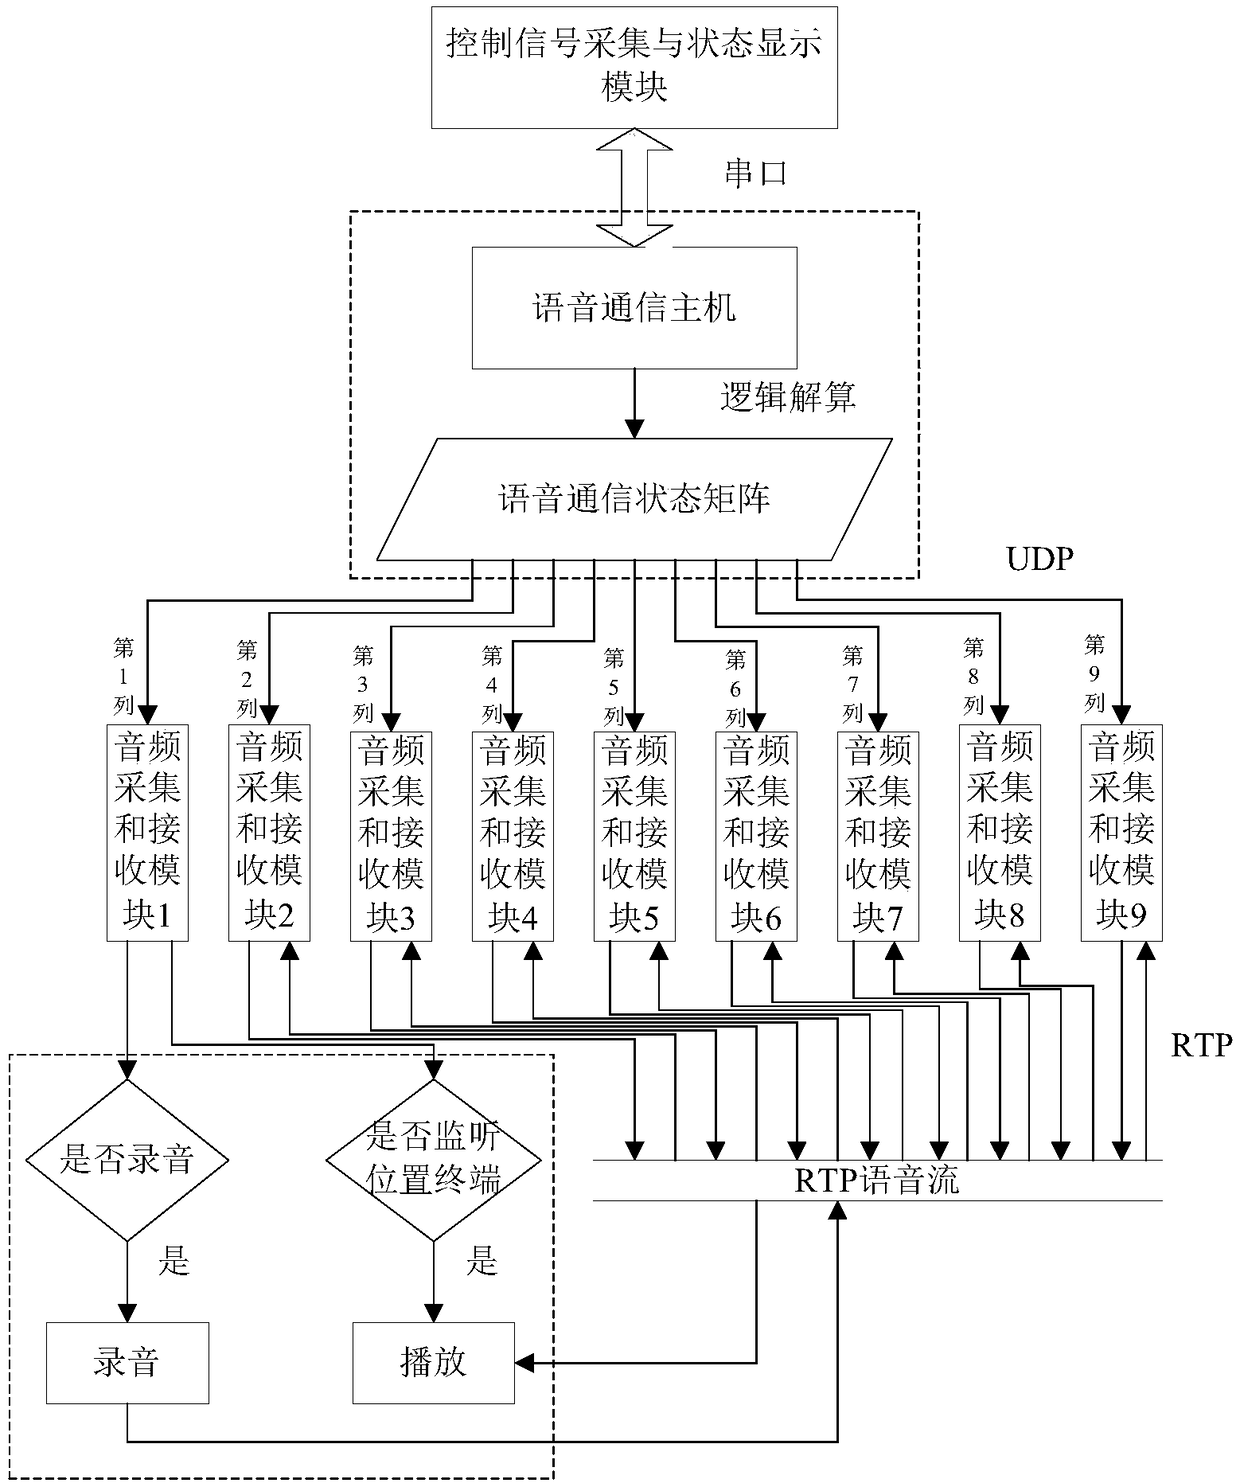 A multi-channel voice communication simulation system and method for a flight simulator